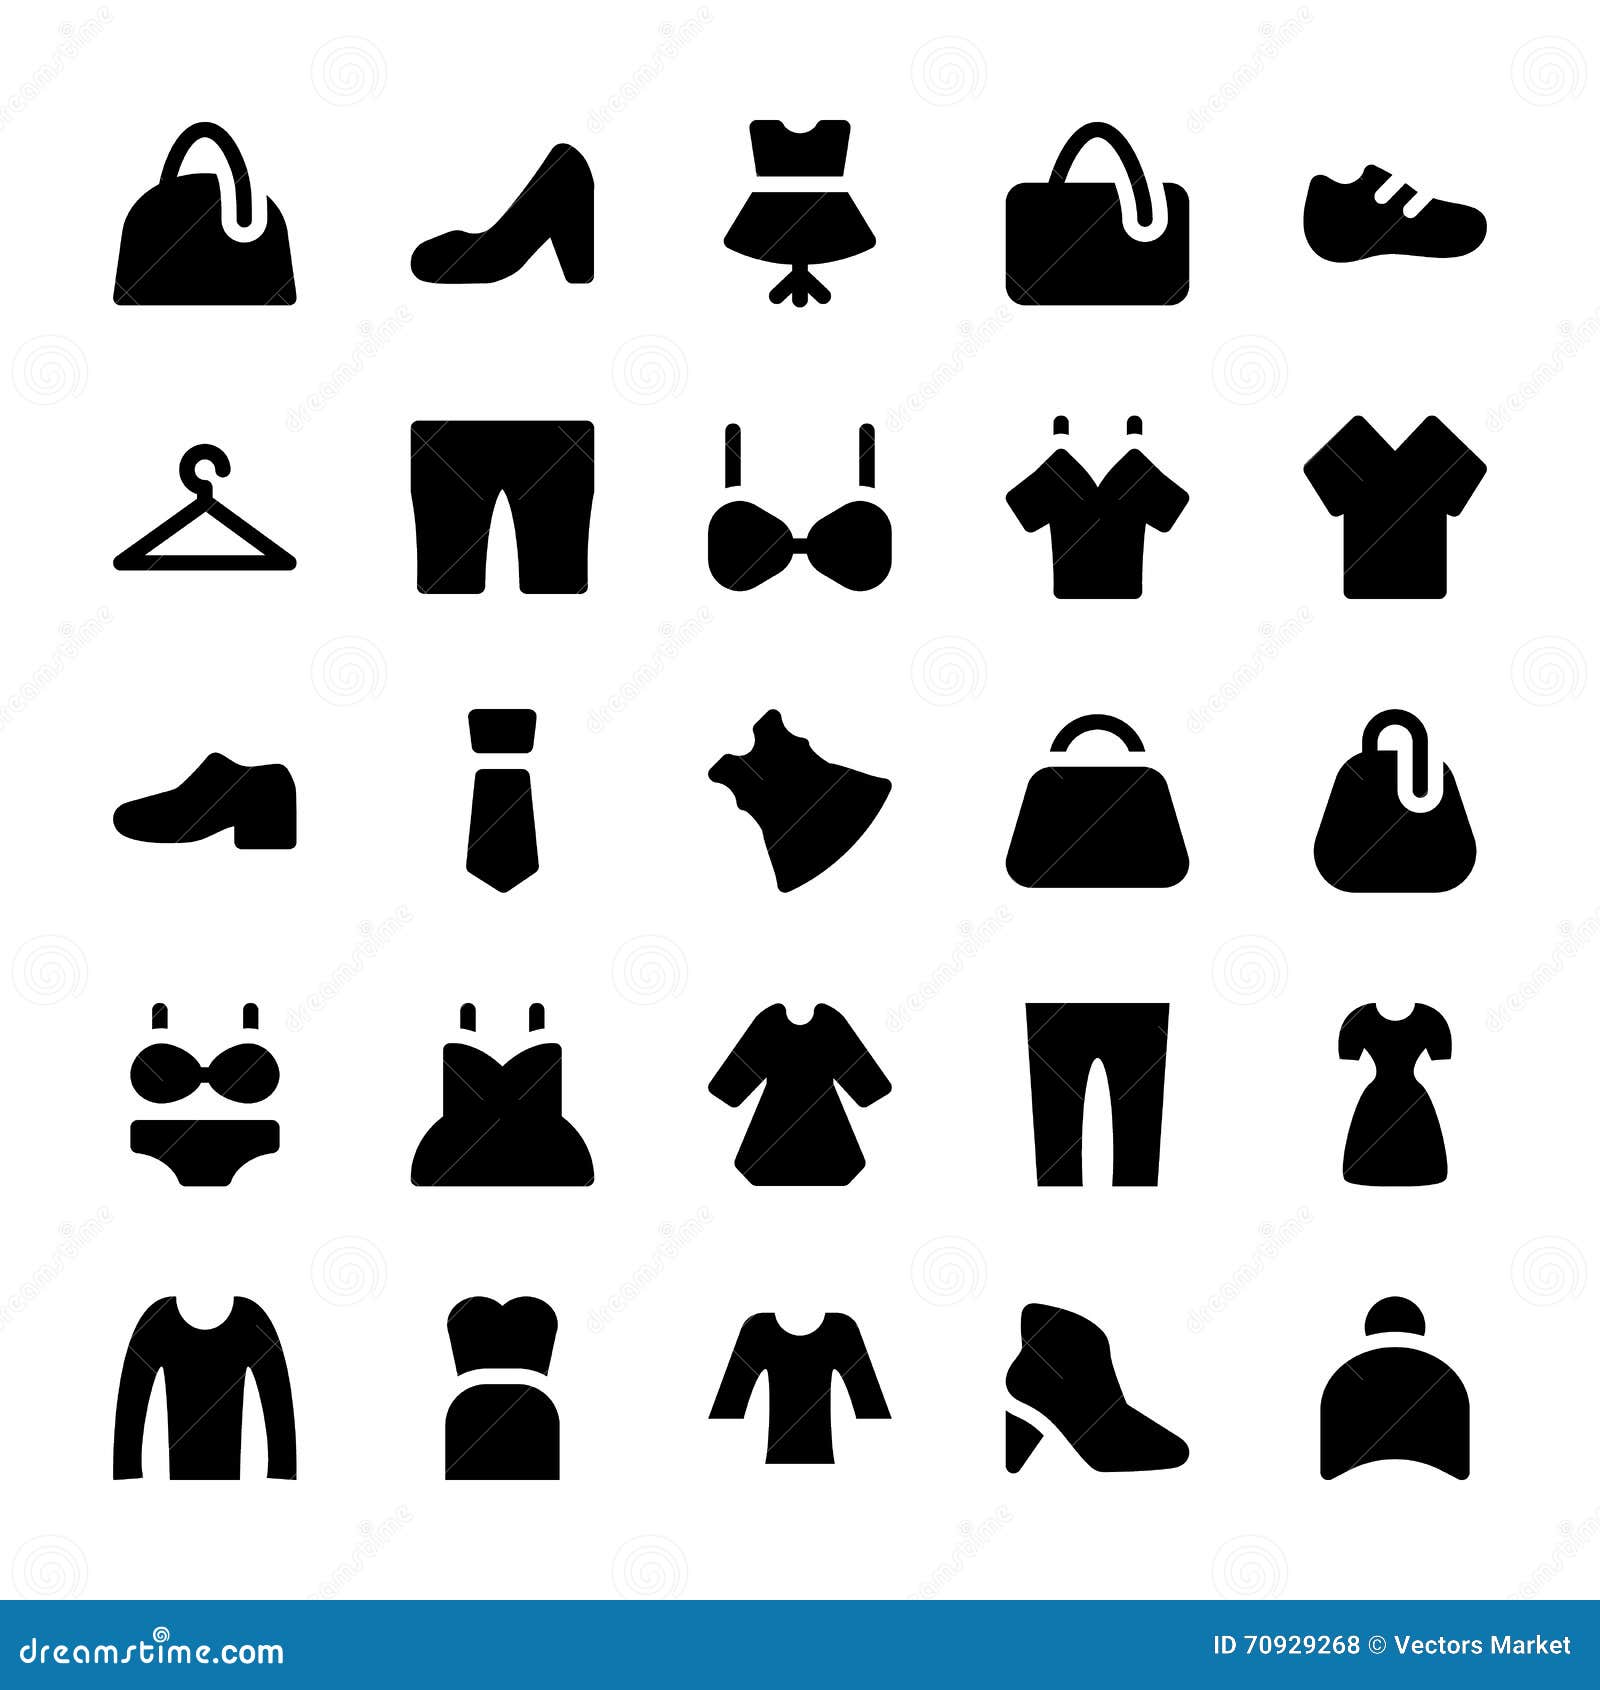 Clothes Vector Icons 2 stock illustration. Illustration of fashion ...